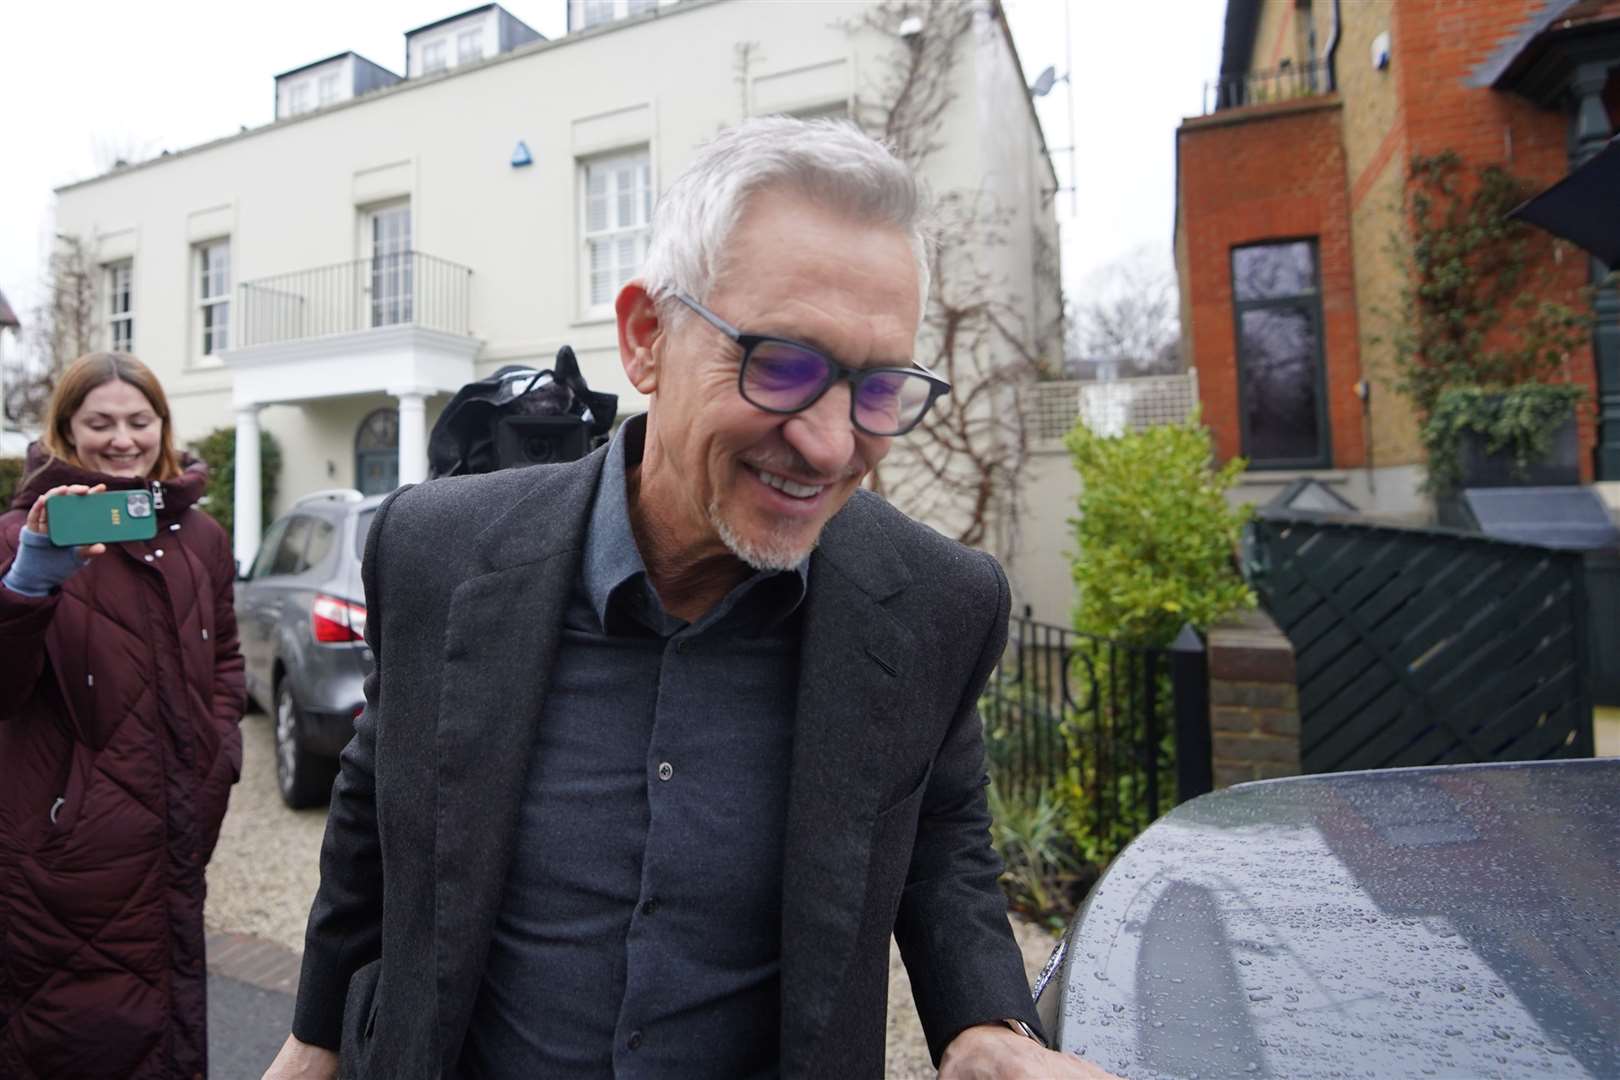 Lineker has been reprimanded by the BBC after responding on Twitter to a Home Office video (James Manning/PA)